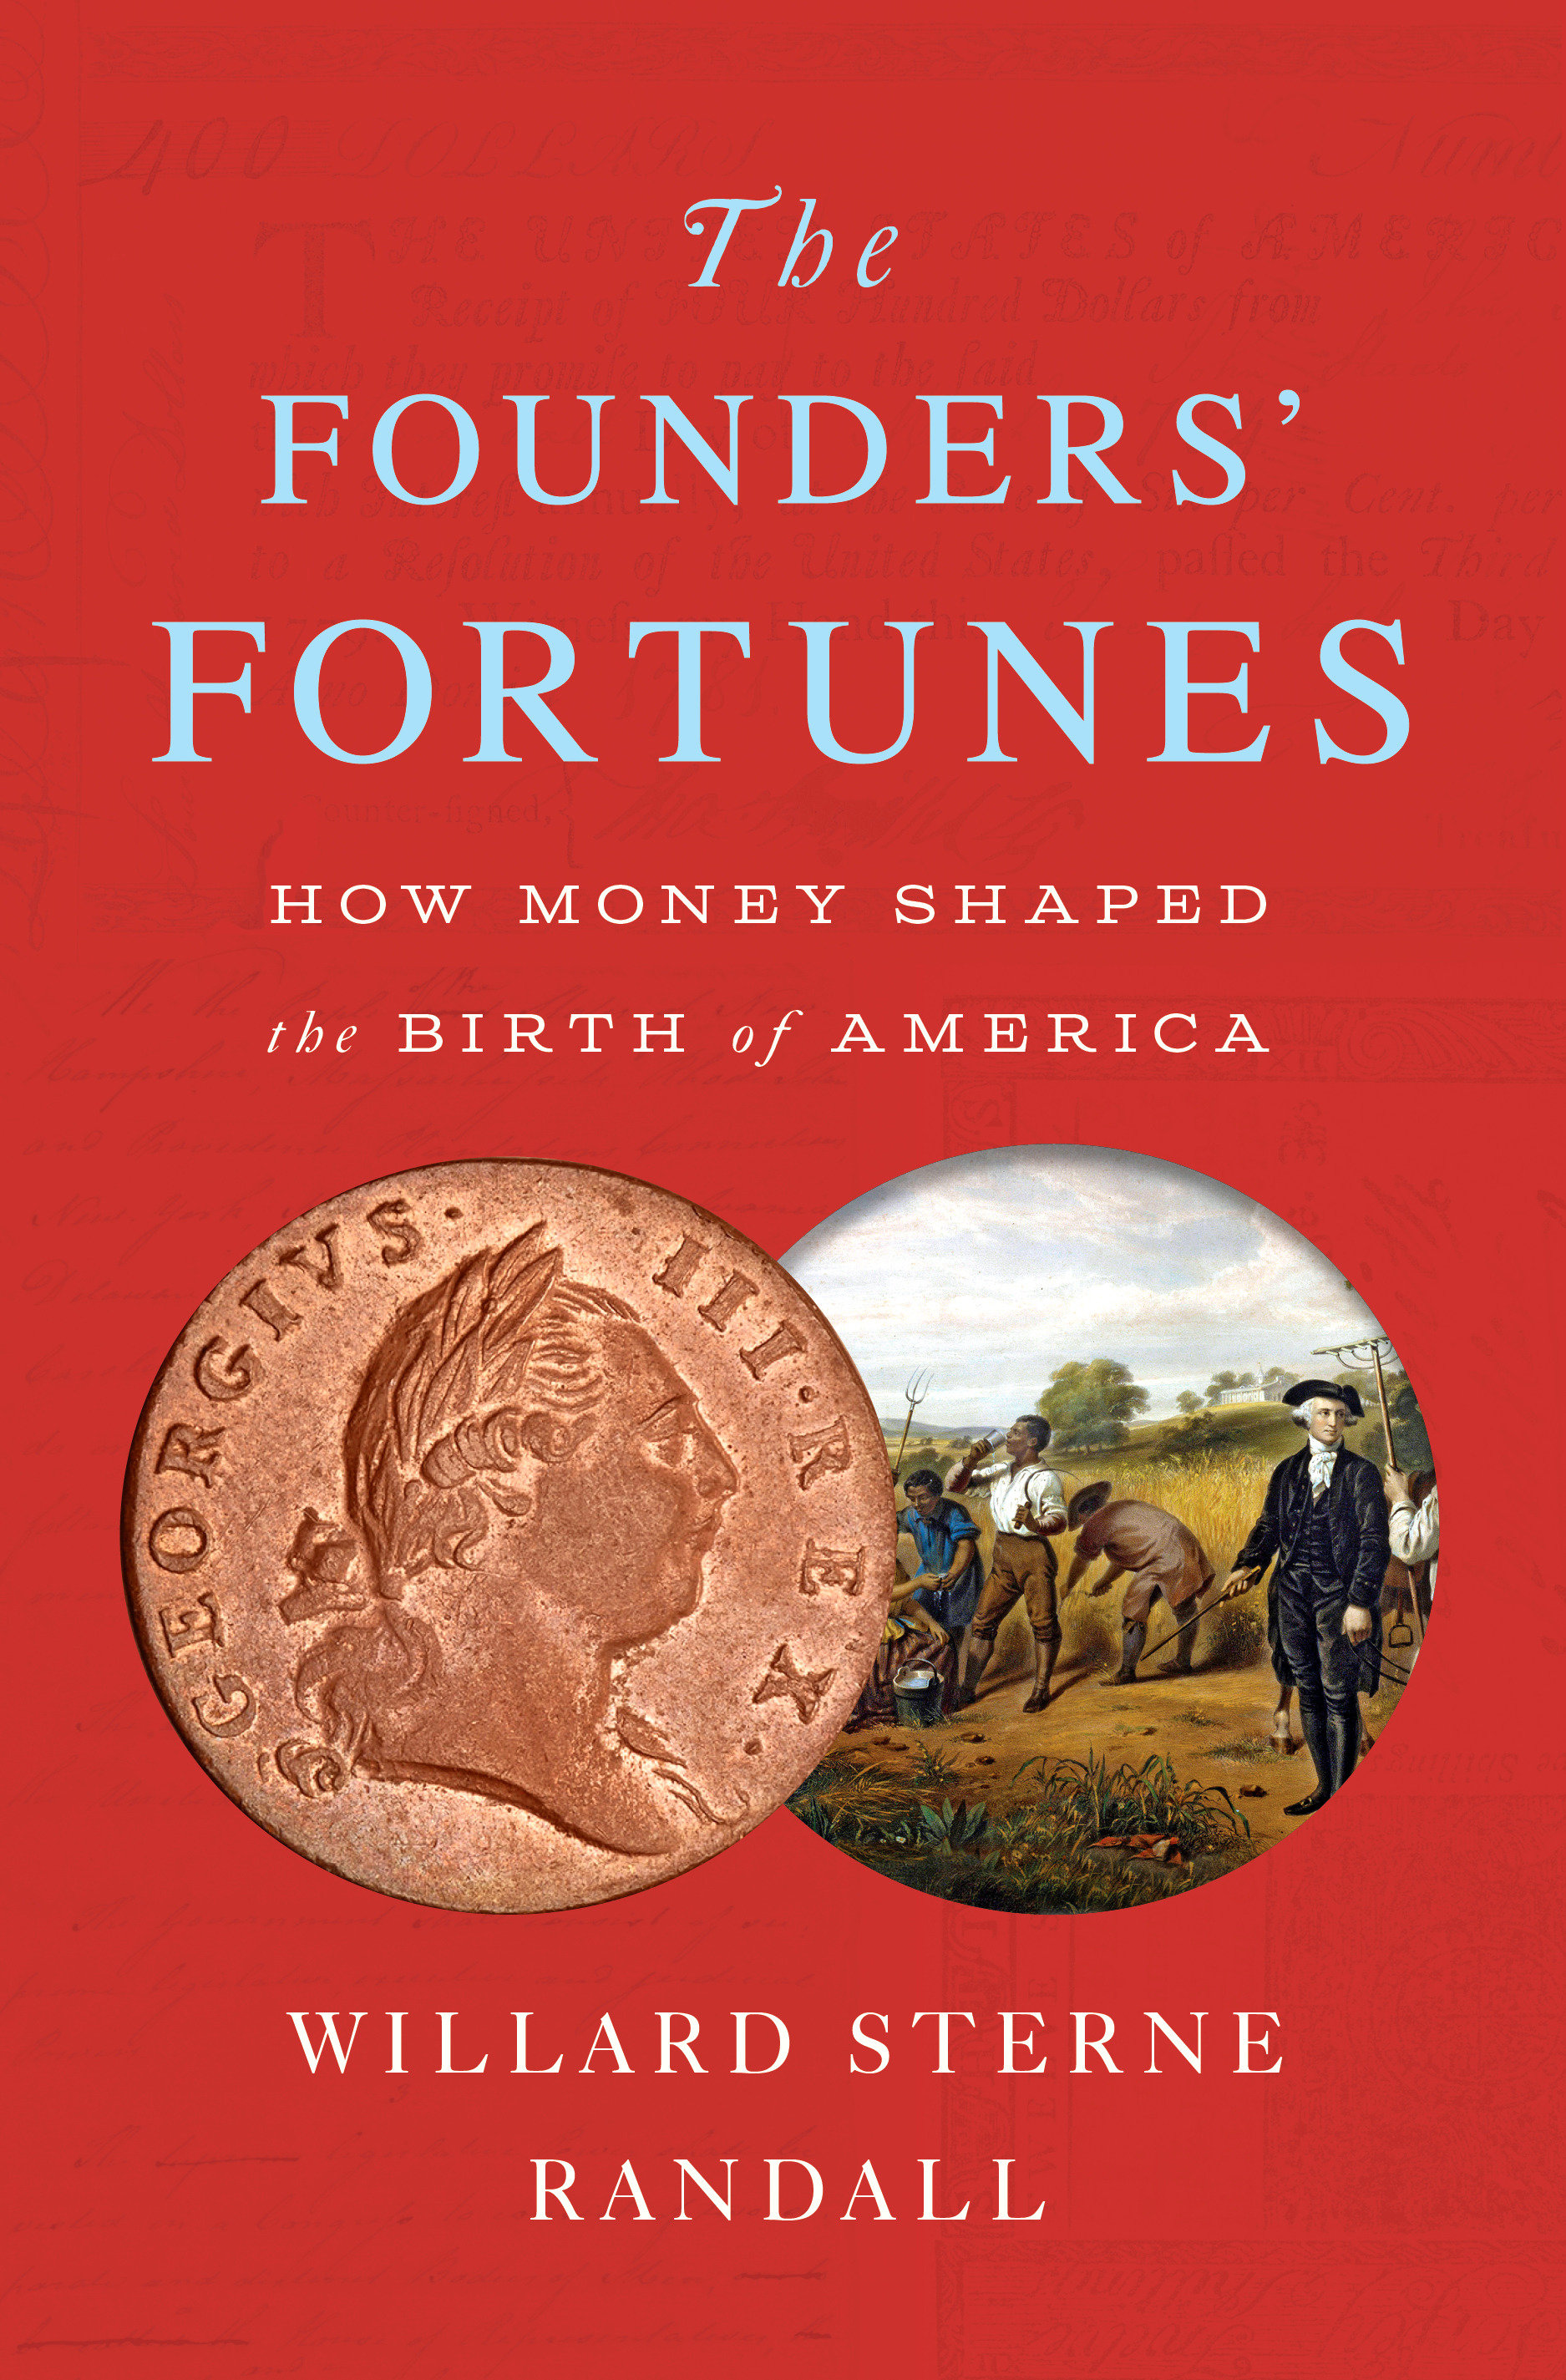 The Founders' Fortunes (Hardcover Book)